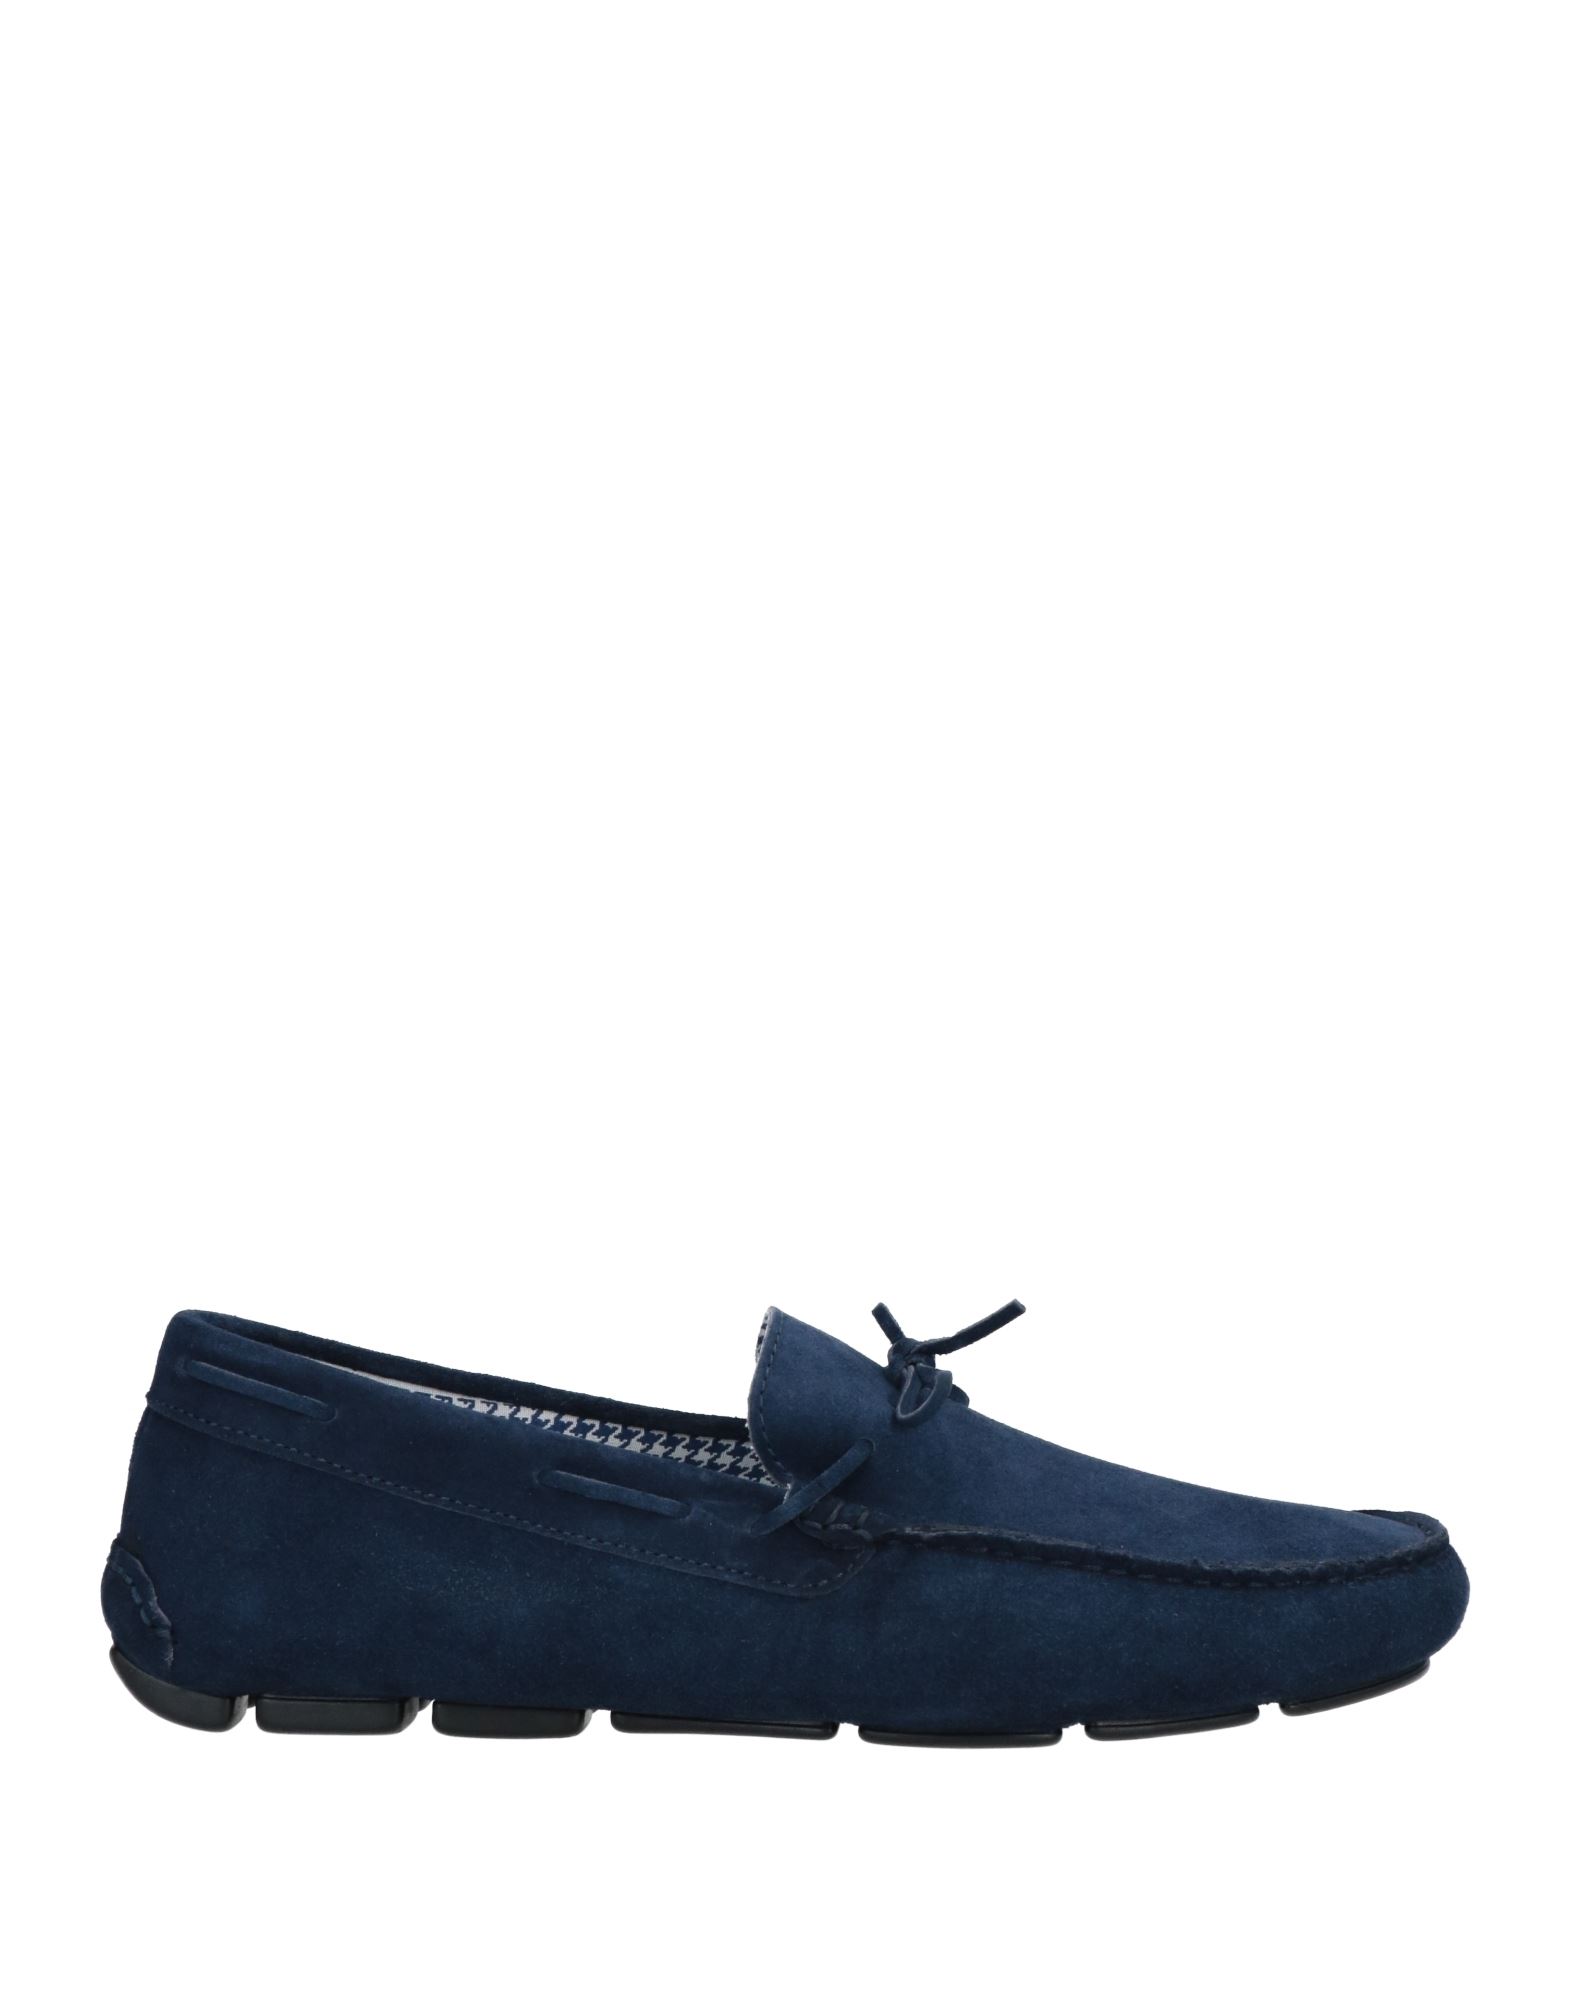 Primo Emporio Loafers In Navy Blue